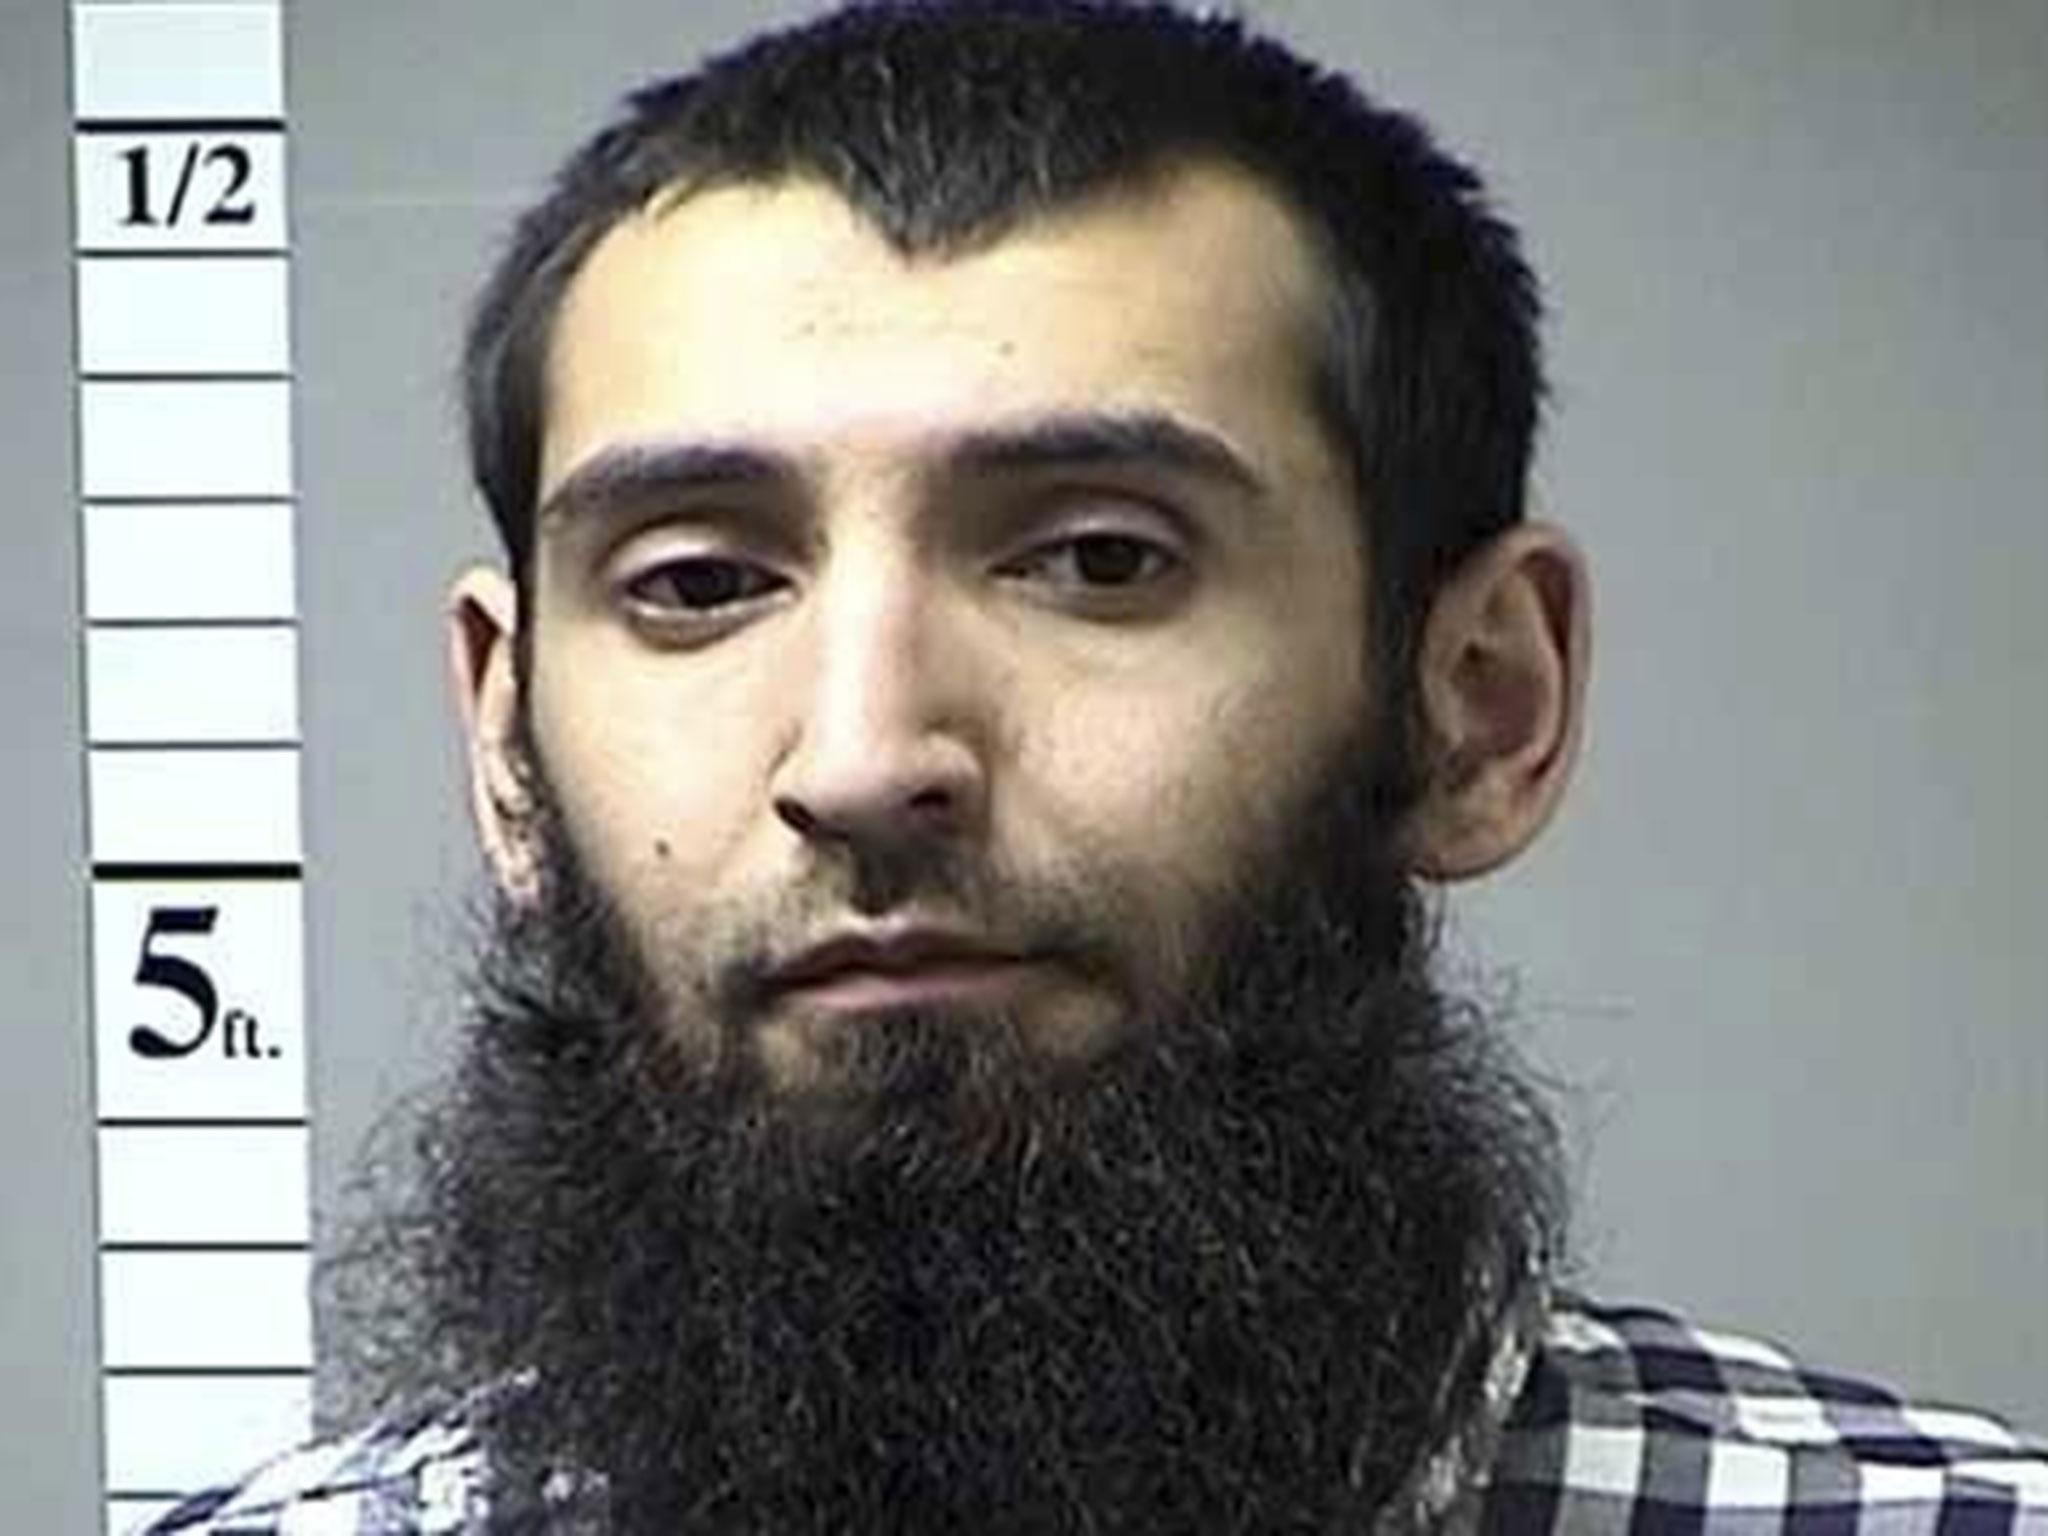 &#13;
Sayfullo Saipov is suspected of mowing down pedestrians and cyclists along a busy bike path near the World Trade Centre memorial St Charles County Department of Corrections/KMOV via AP&#13;